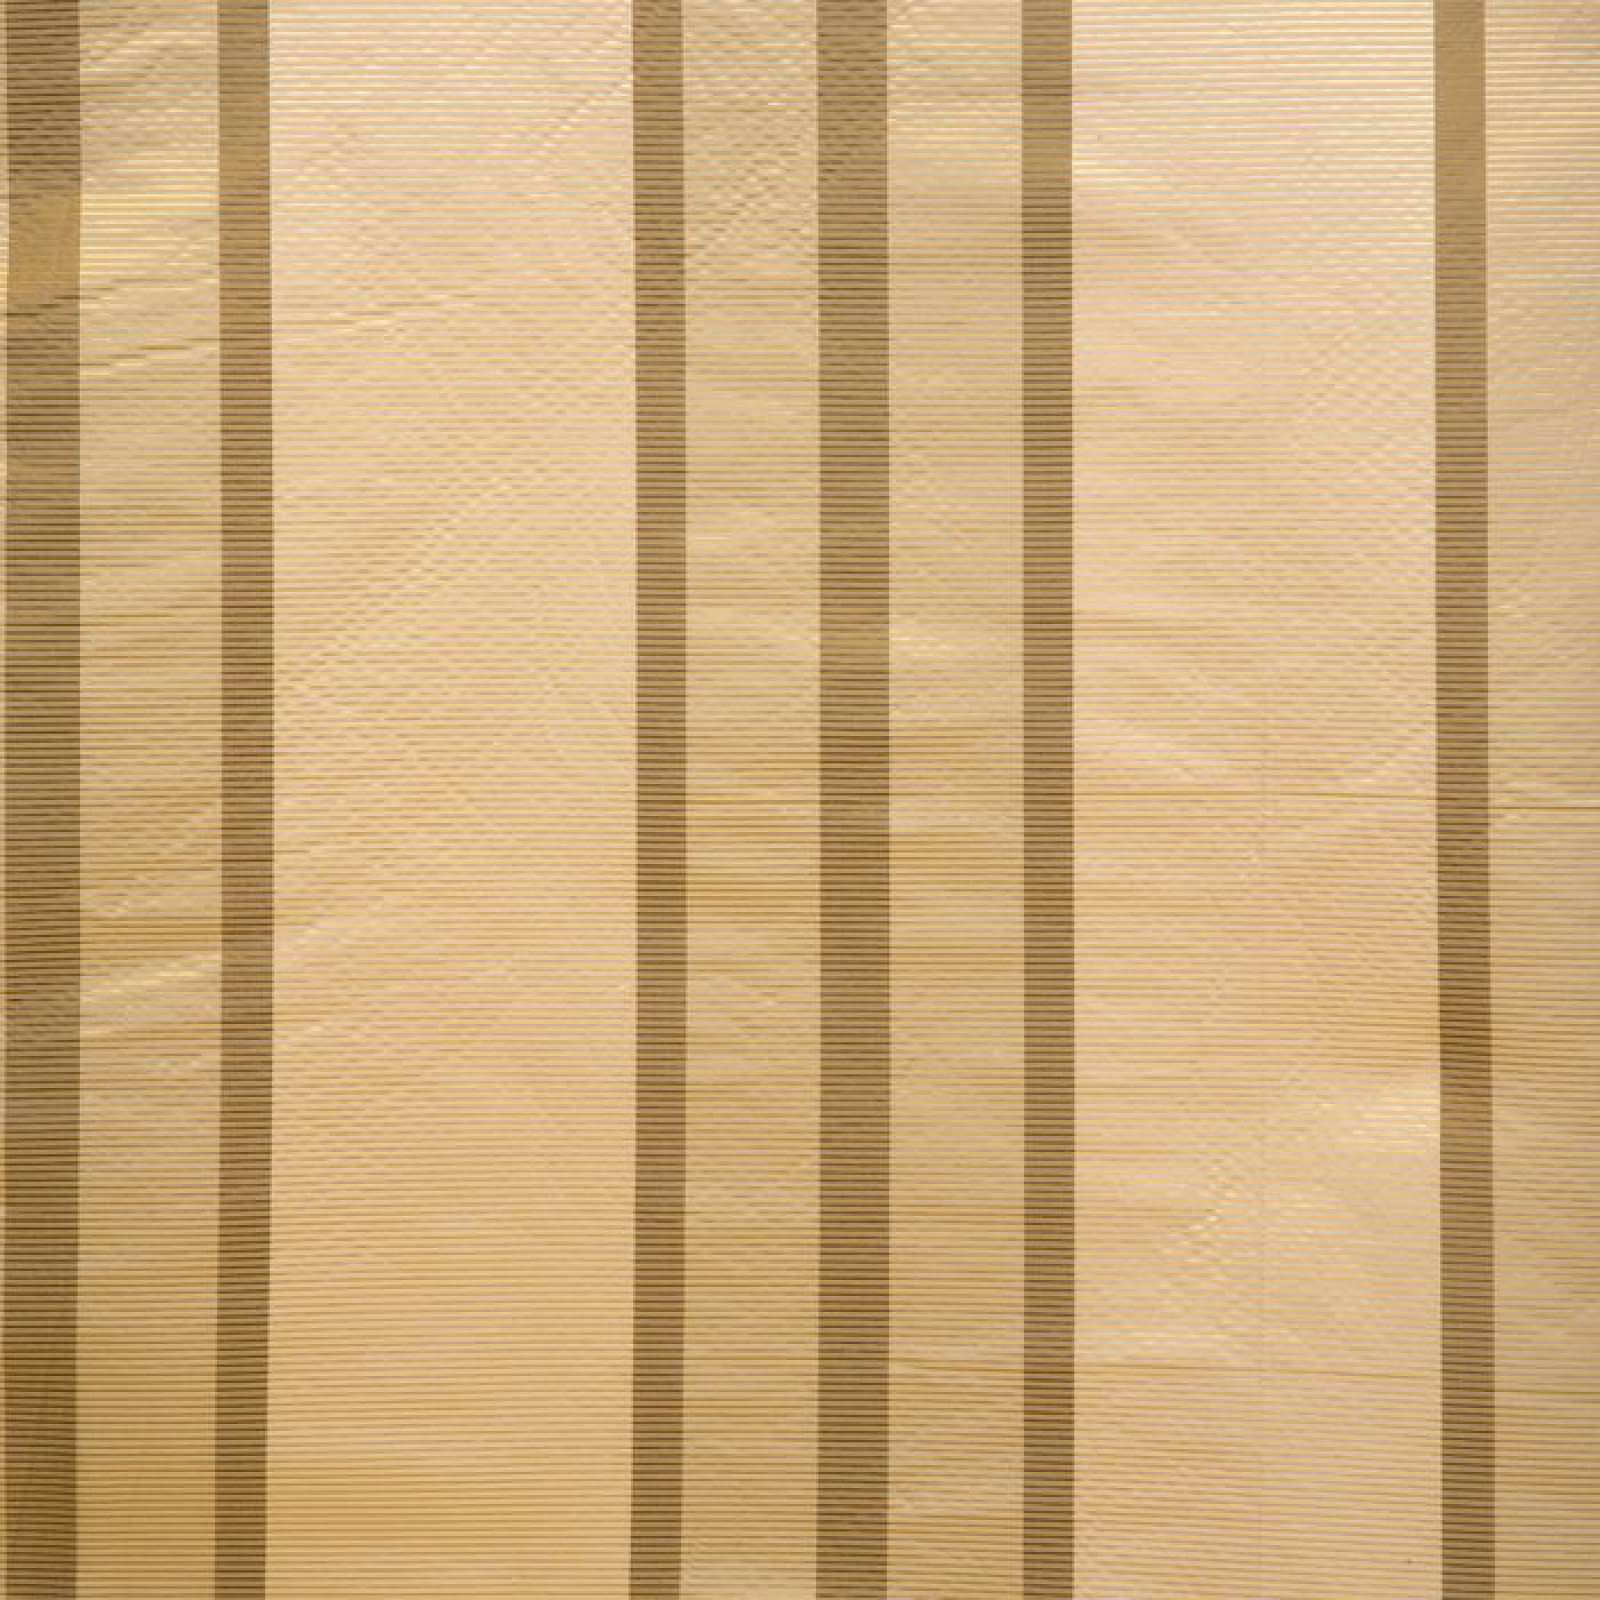 CANNET 2212 IVORY BROWN BEIGE